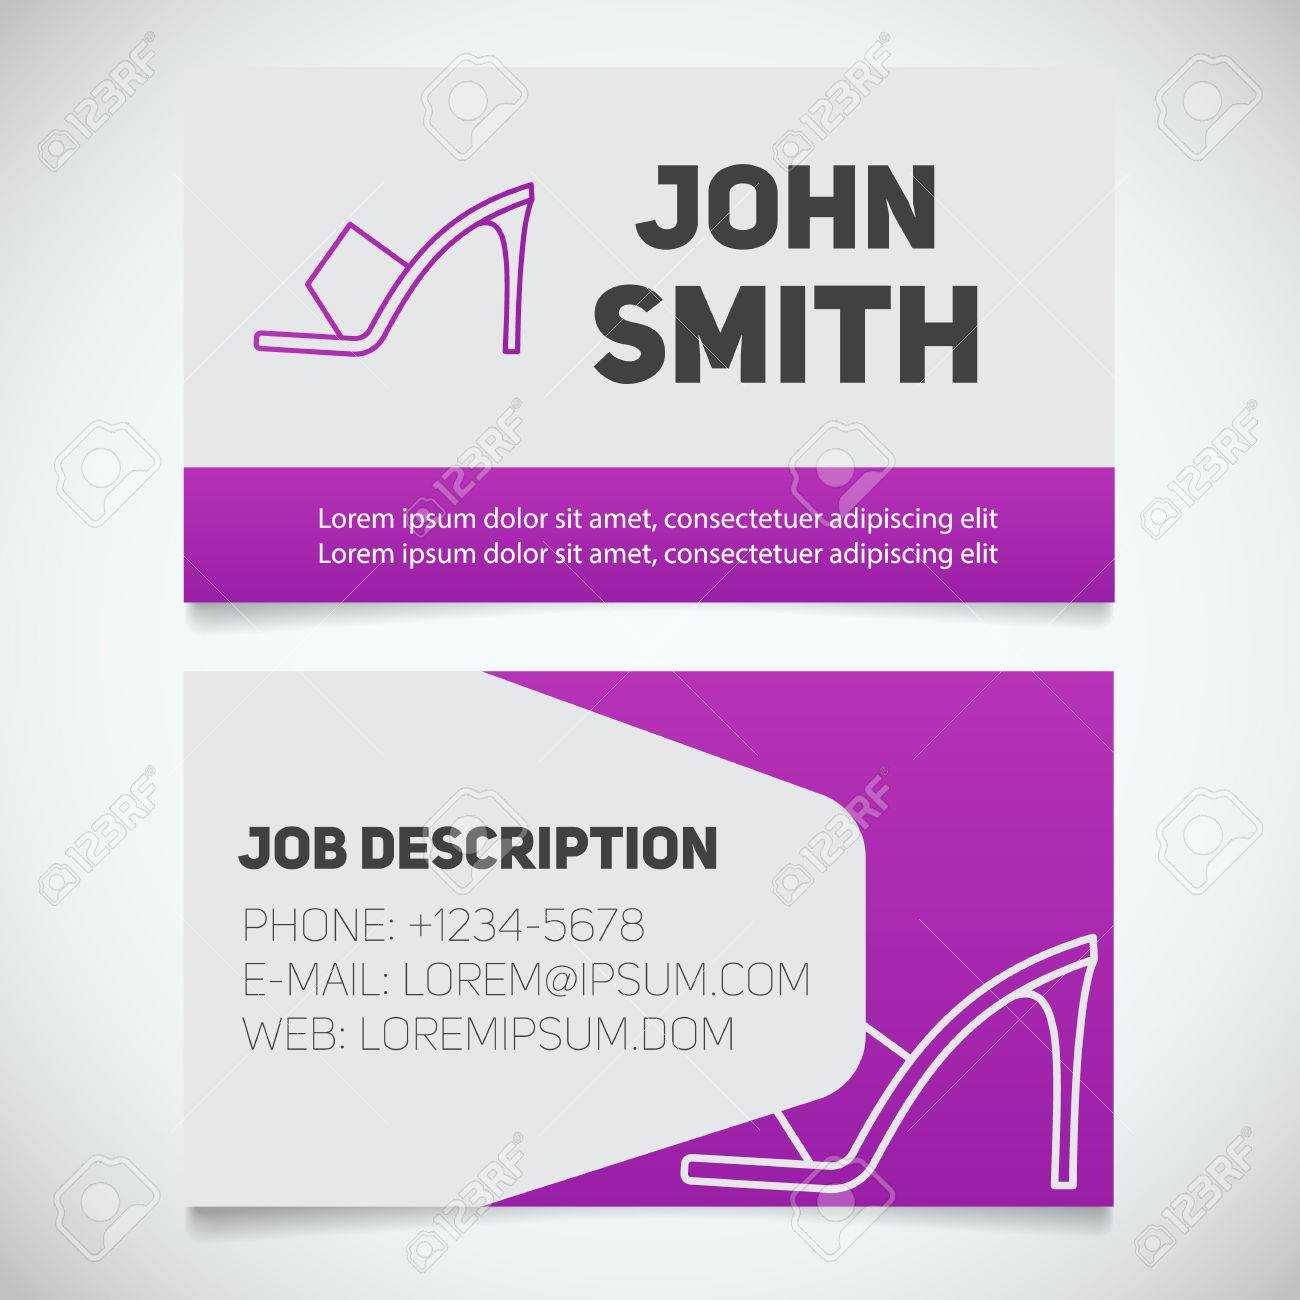 Business Card Print Template With High Heel Shoe Logo. Manager With Regard To High Heel Template For Cards